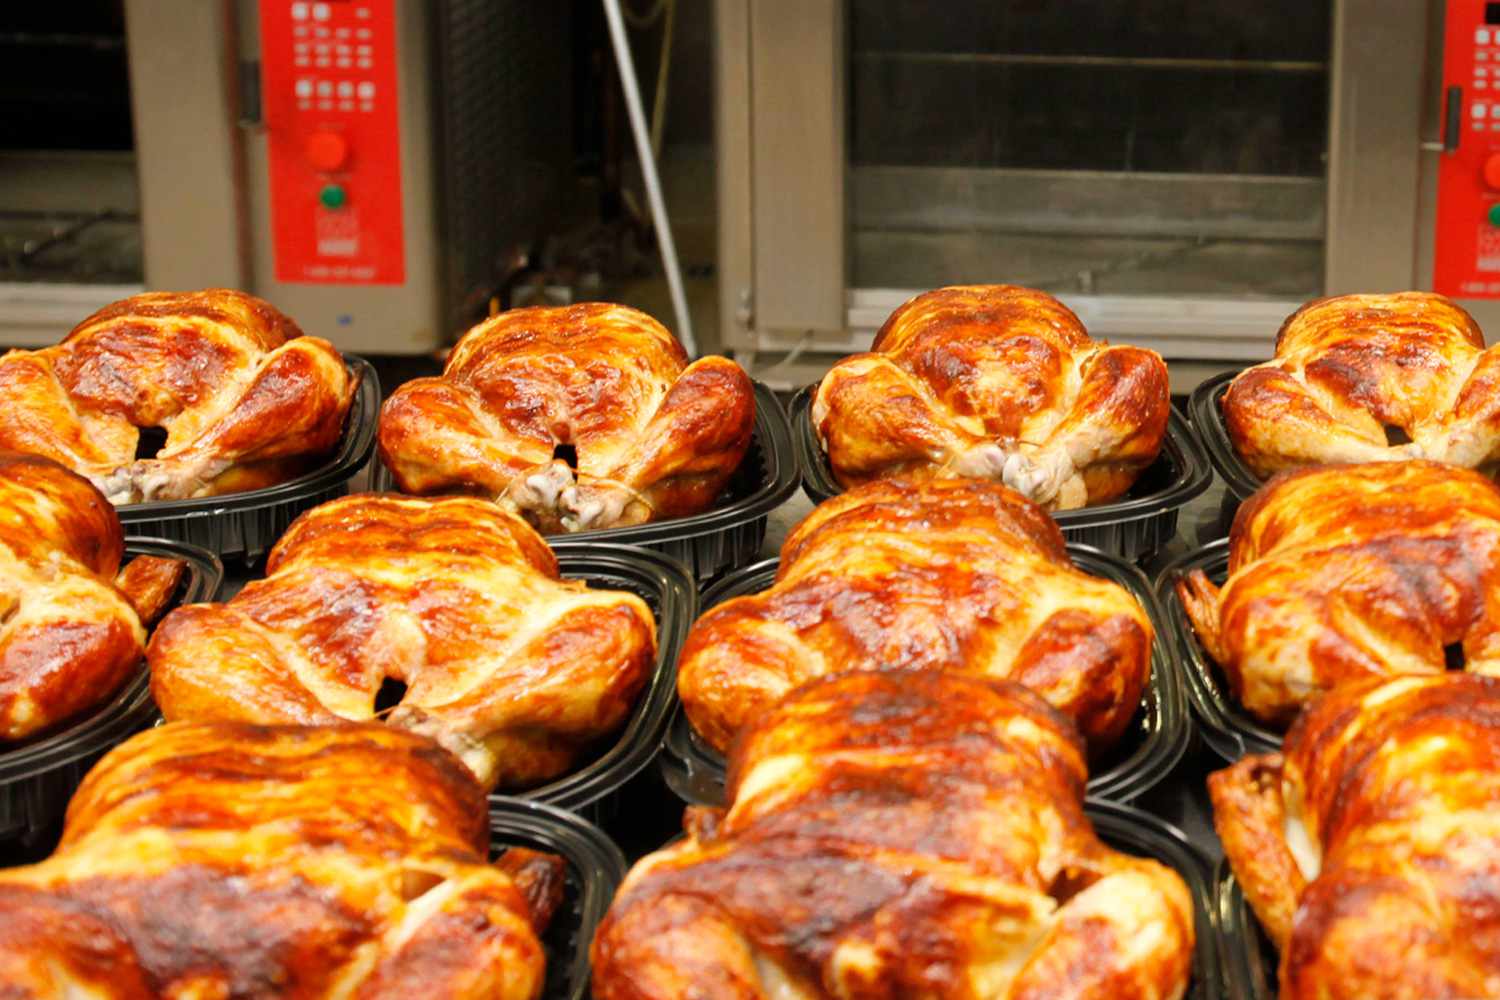 Costco Faces Animal Welfare Lawsuit Over Their $4.99 Rotisserie Chicken